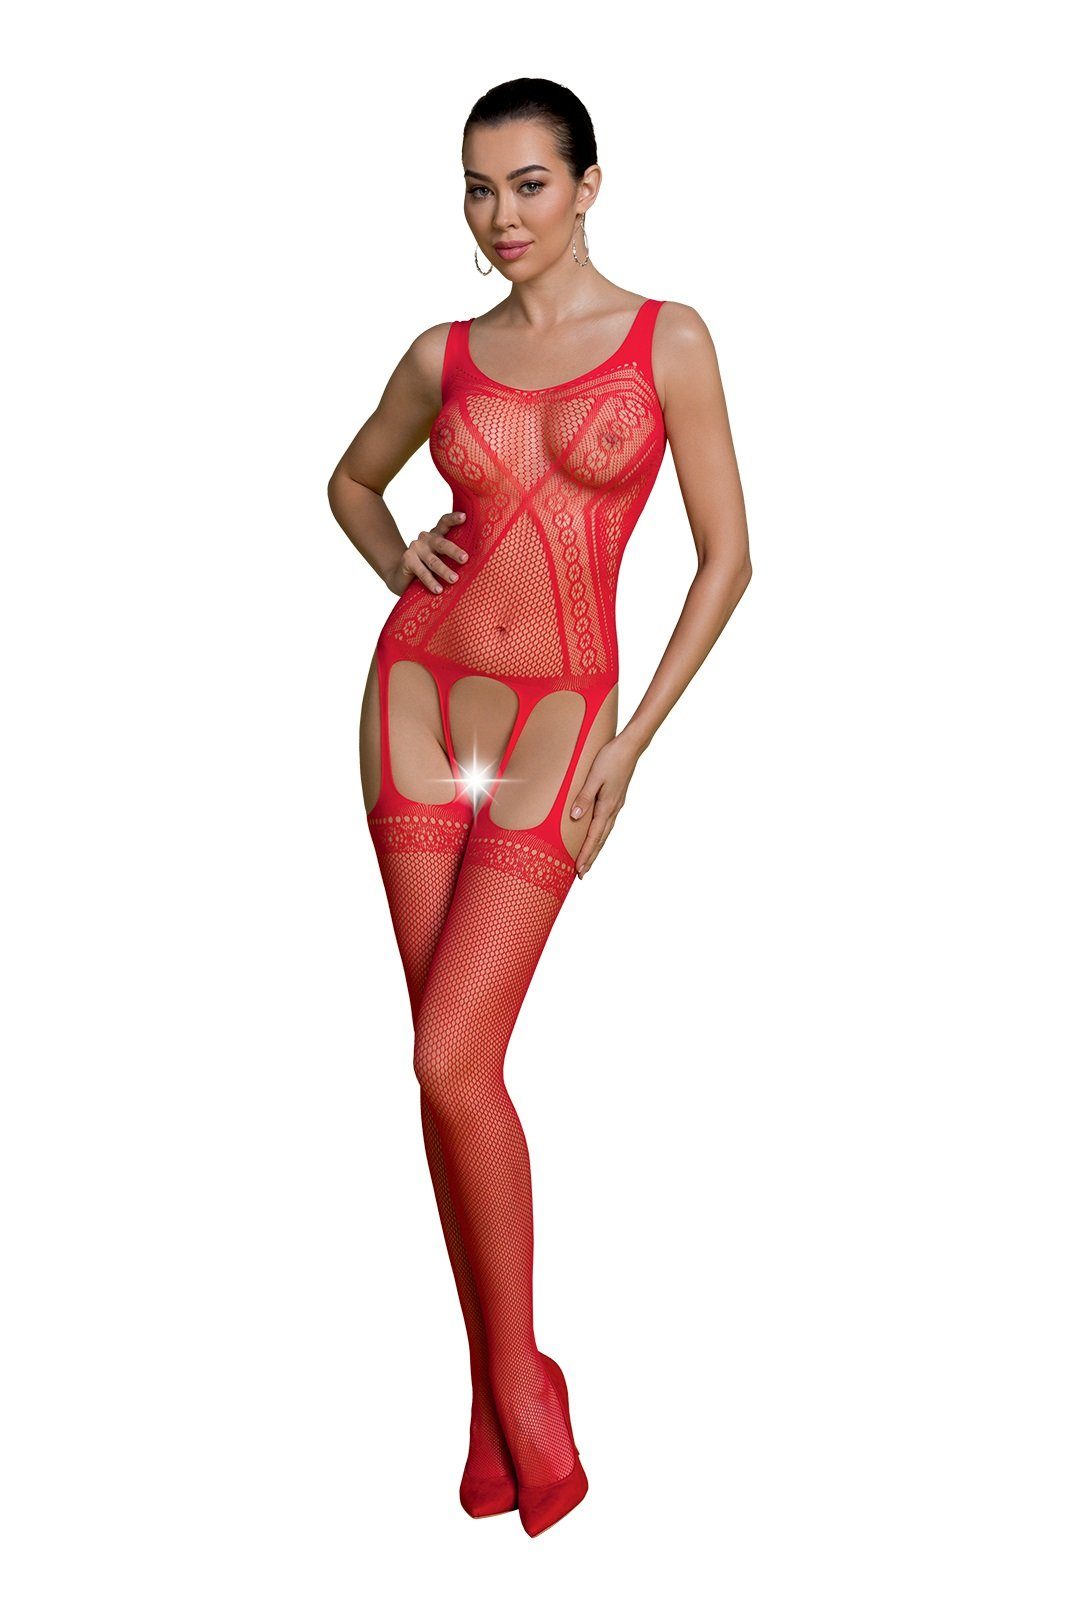 Bodystocking ouvert Passion St) Catsuit transparent schwarz Collection Eco DEN Bodystocking 20 Passion (1